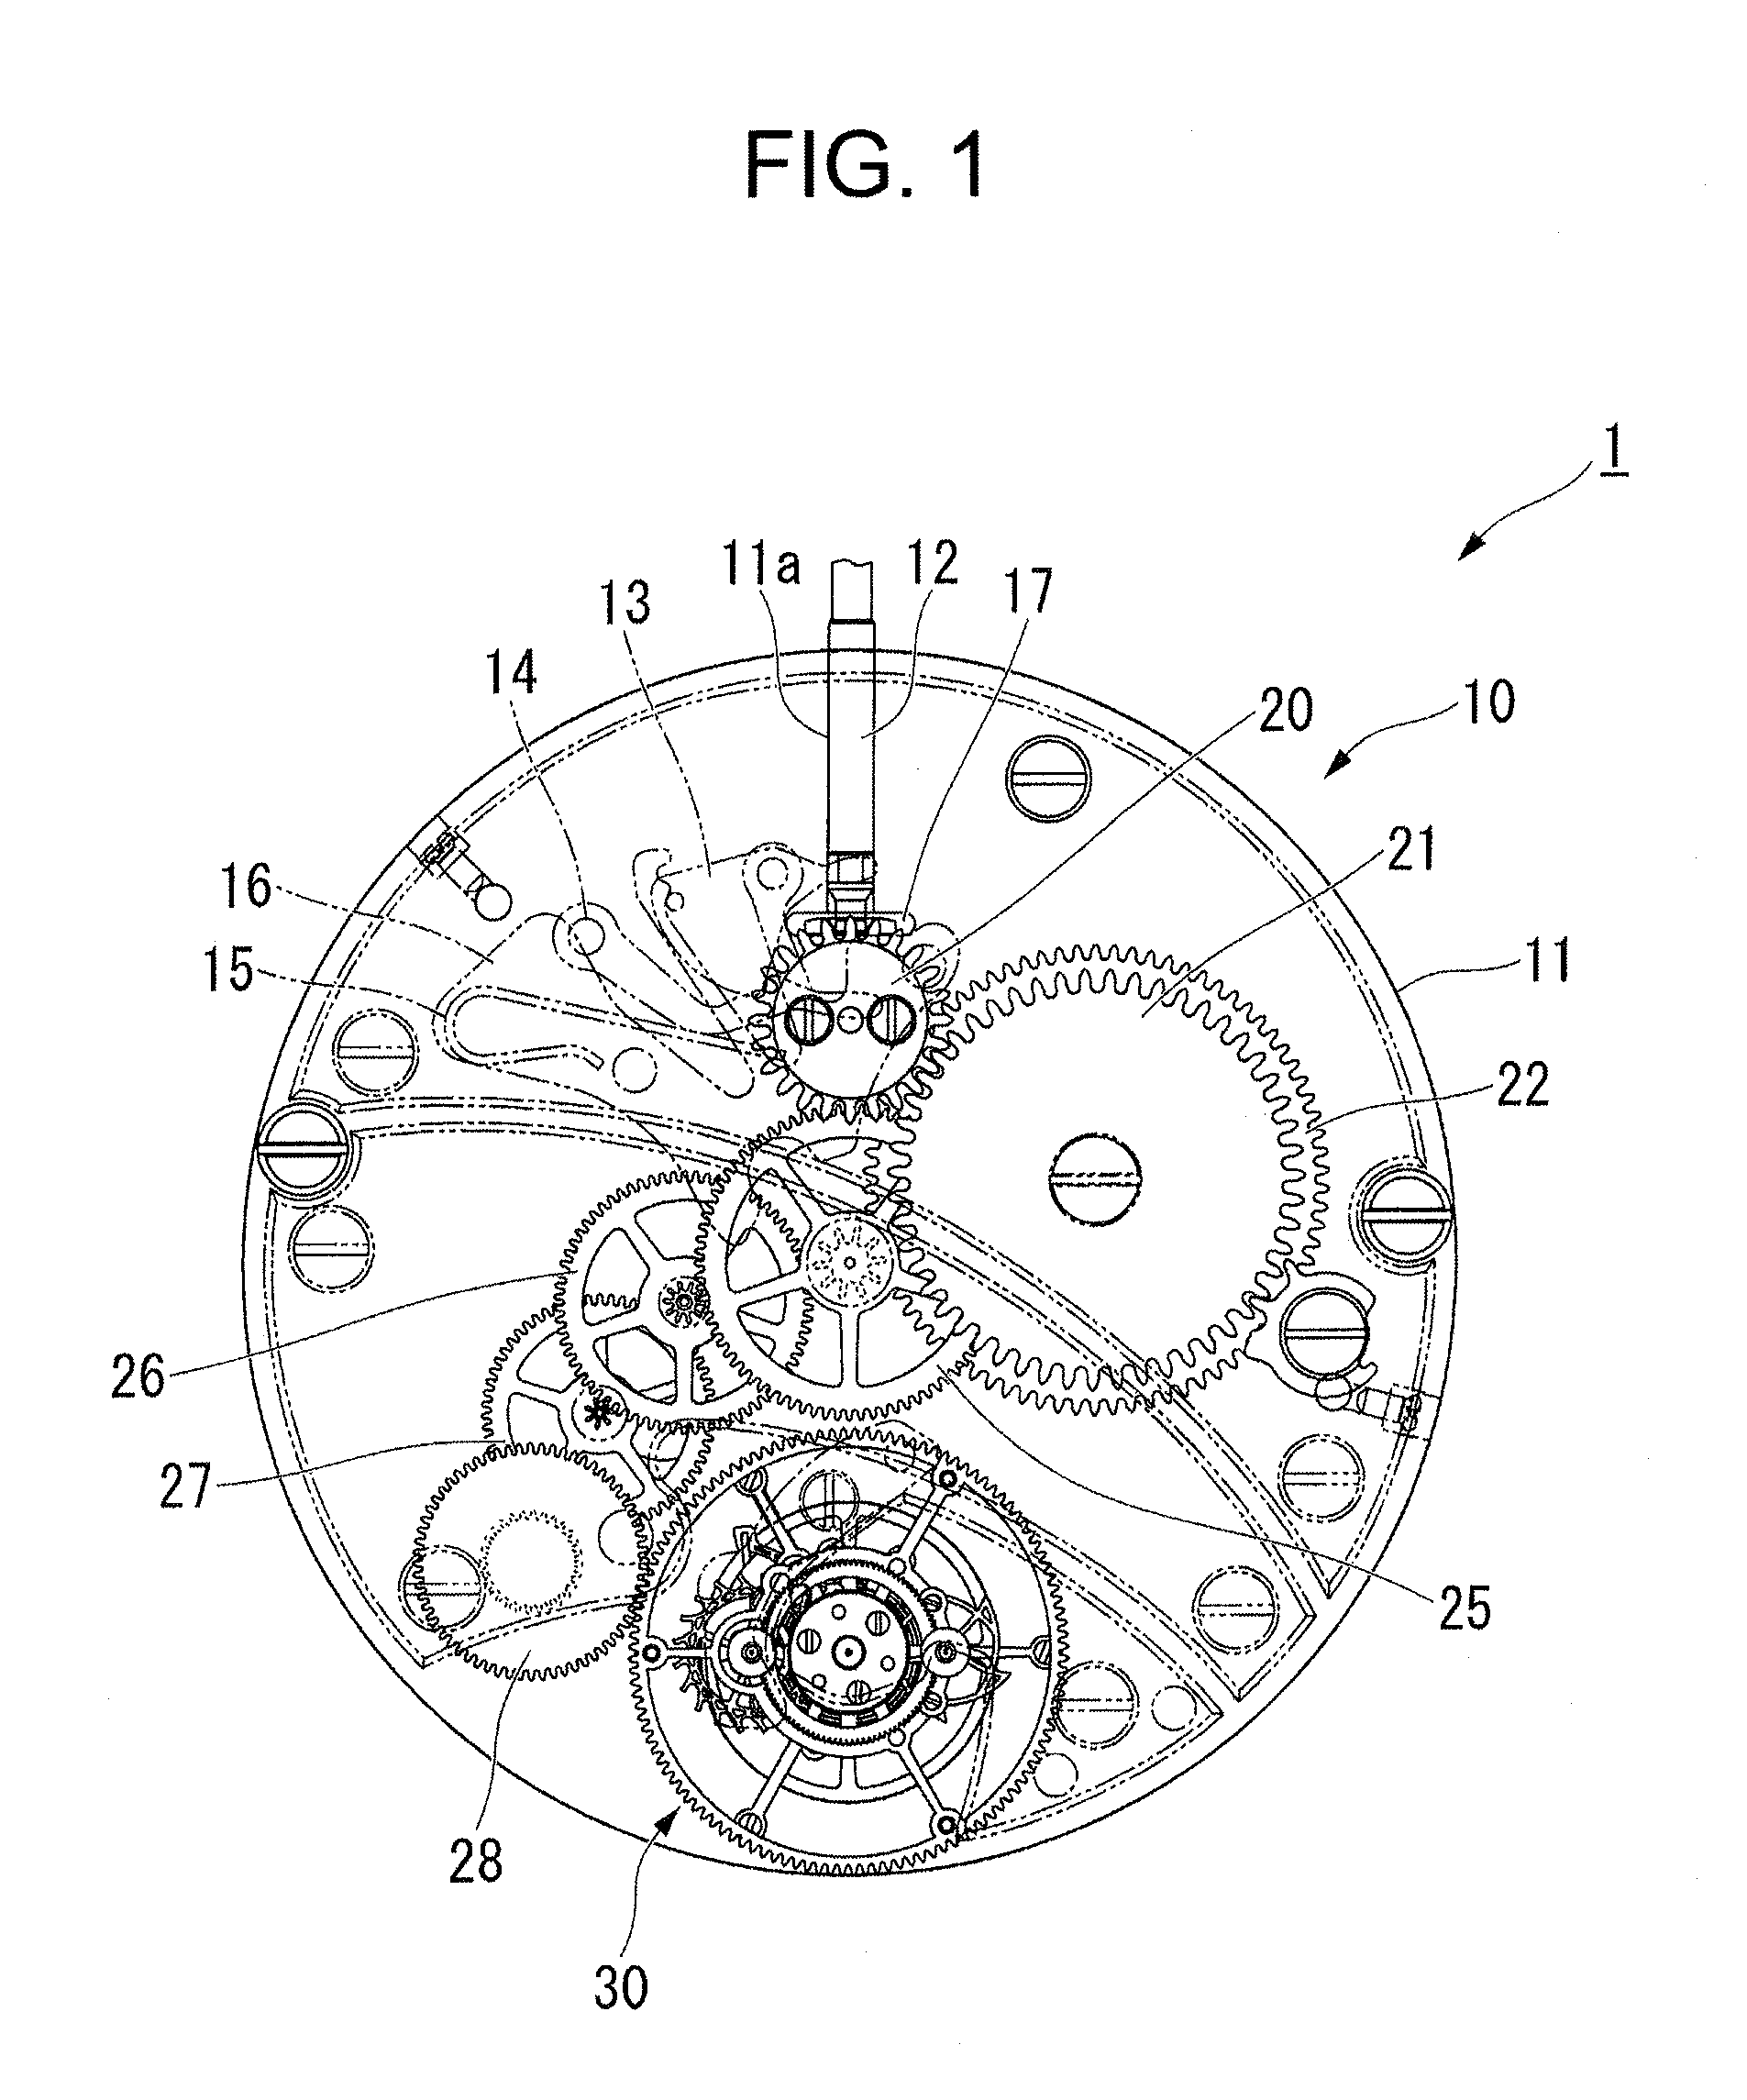 Constant force device, movement and mechanical timepiece